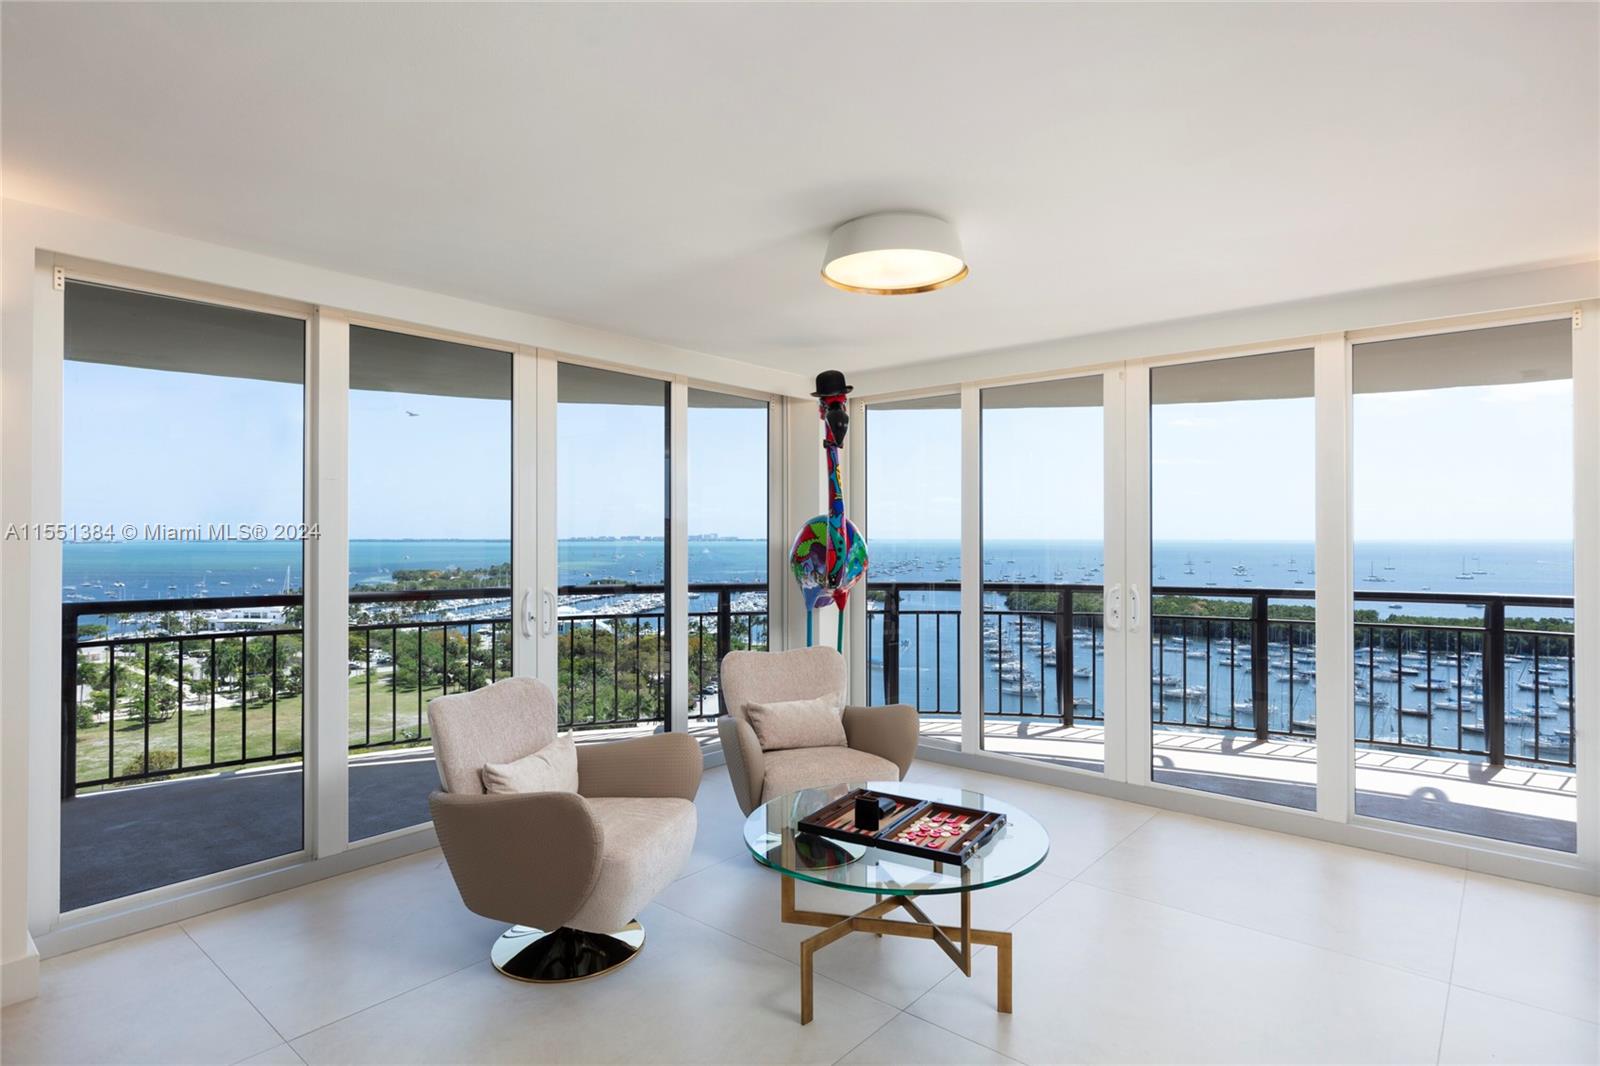 A modern haven in the sky with the most PRICELESS views in all of Coconut Grove. The 180 degrees of glass let you take in sparkling Biscayne Bay, Downtown, and Key Biscayne from every angle. With generous and thoughtful entertaining spaces including a chef’s kitchen with full bar and seating, wraparound balconies, dining room with video wall, and game area, your guests will be dazzled by more than just the vistas. Enjoy unparalleled walkability to the center Coconut Grove and its dining and shopping. Amenities come up to you with private gym, sauna, steam room, and jacuzzi. When you’re ready for relaxation, retreat to a primary suite with two walk-in closets and striking stone wet room with freestanding tub and double shower. Large in-unit storage room plus six assigned parking spaces.